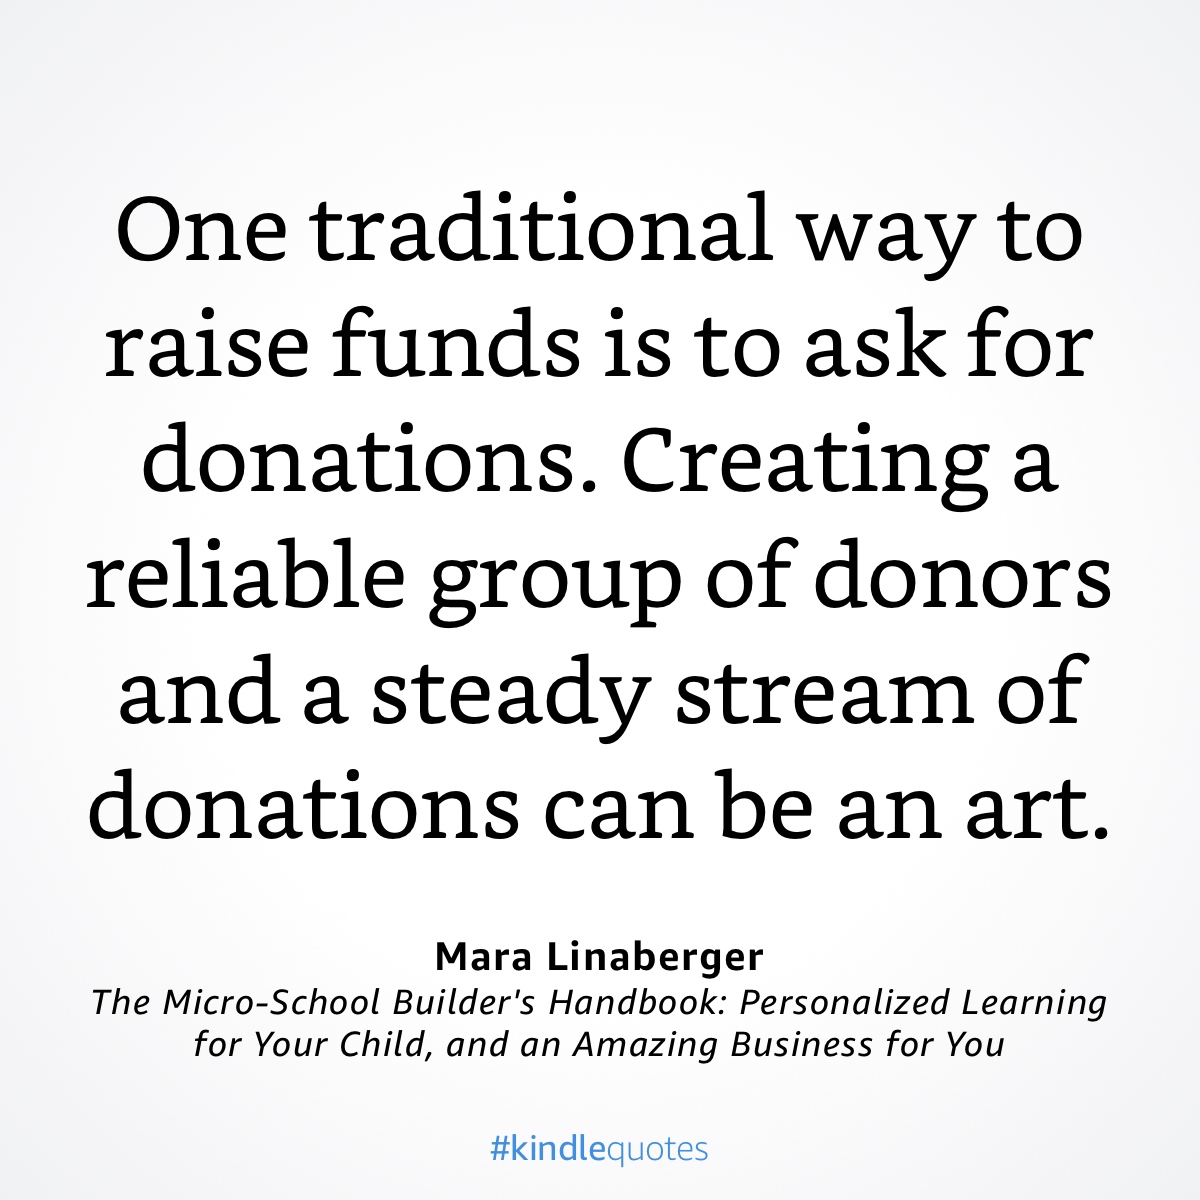 Do you have a strategy for taking donations for your microschool?

🔗 #MicroschoolFundraising #microschool #microschoolbuilders #microschooldistrict #DonorCommunity #EducationMatters #BrighterFuture #TogetherWeCan #MakingAnImpact